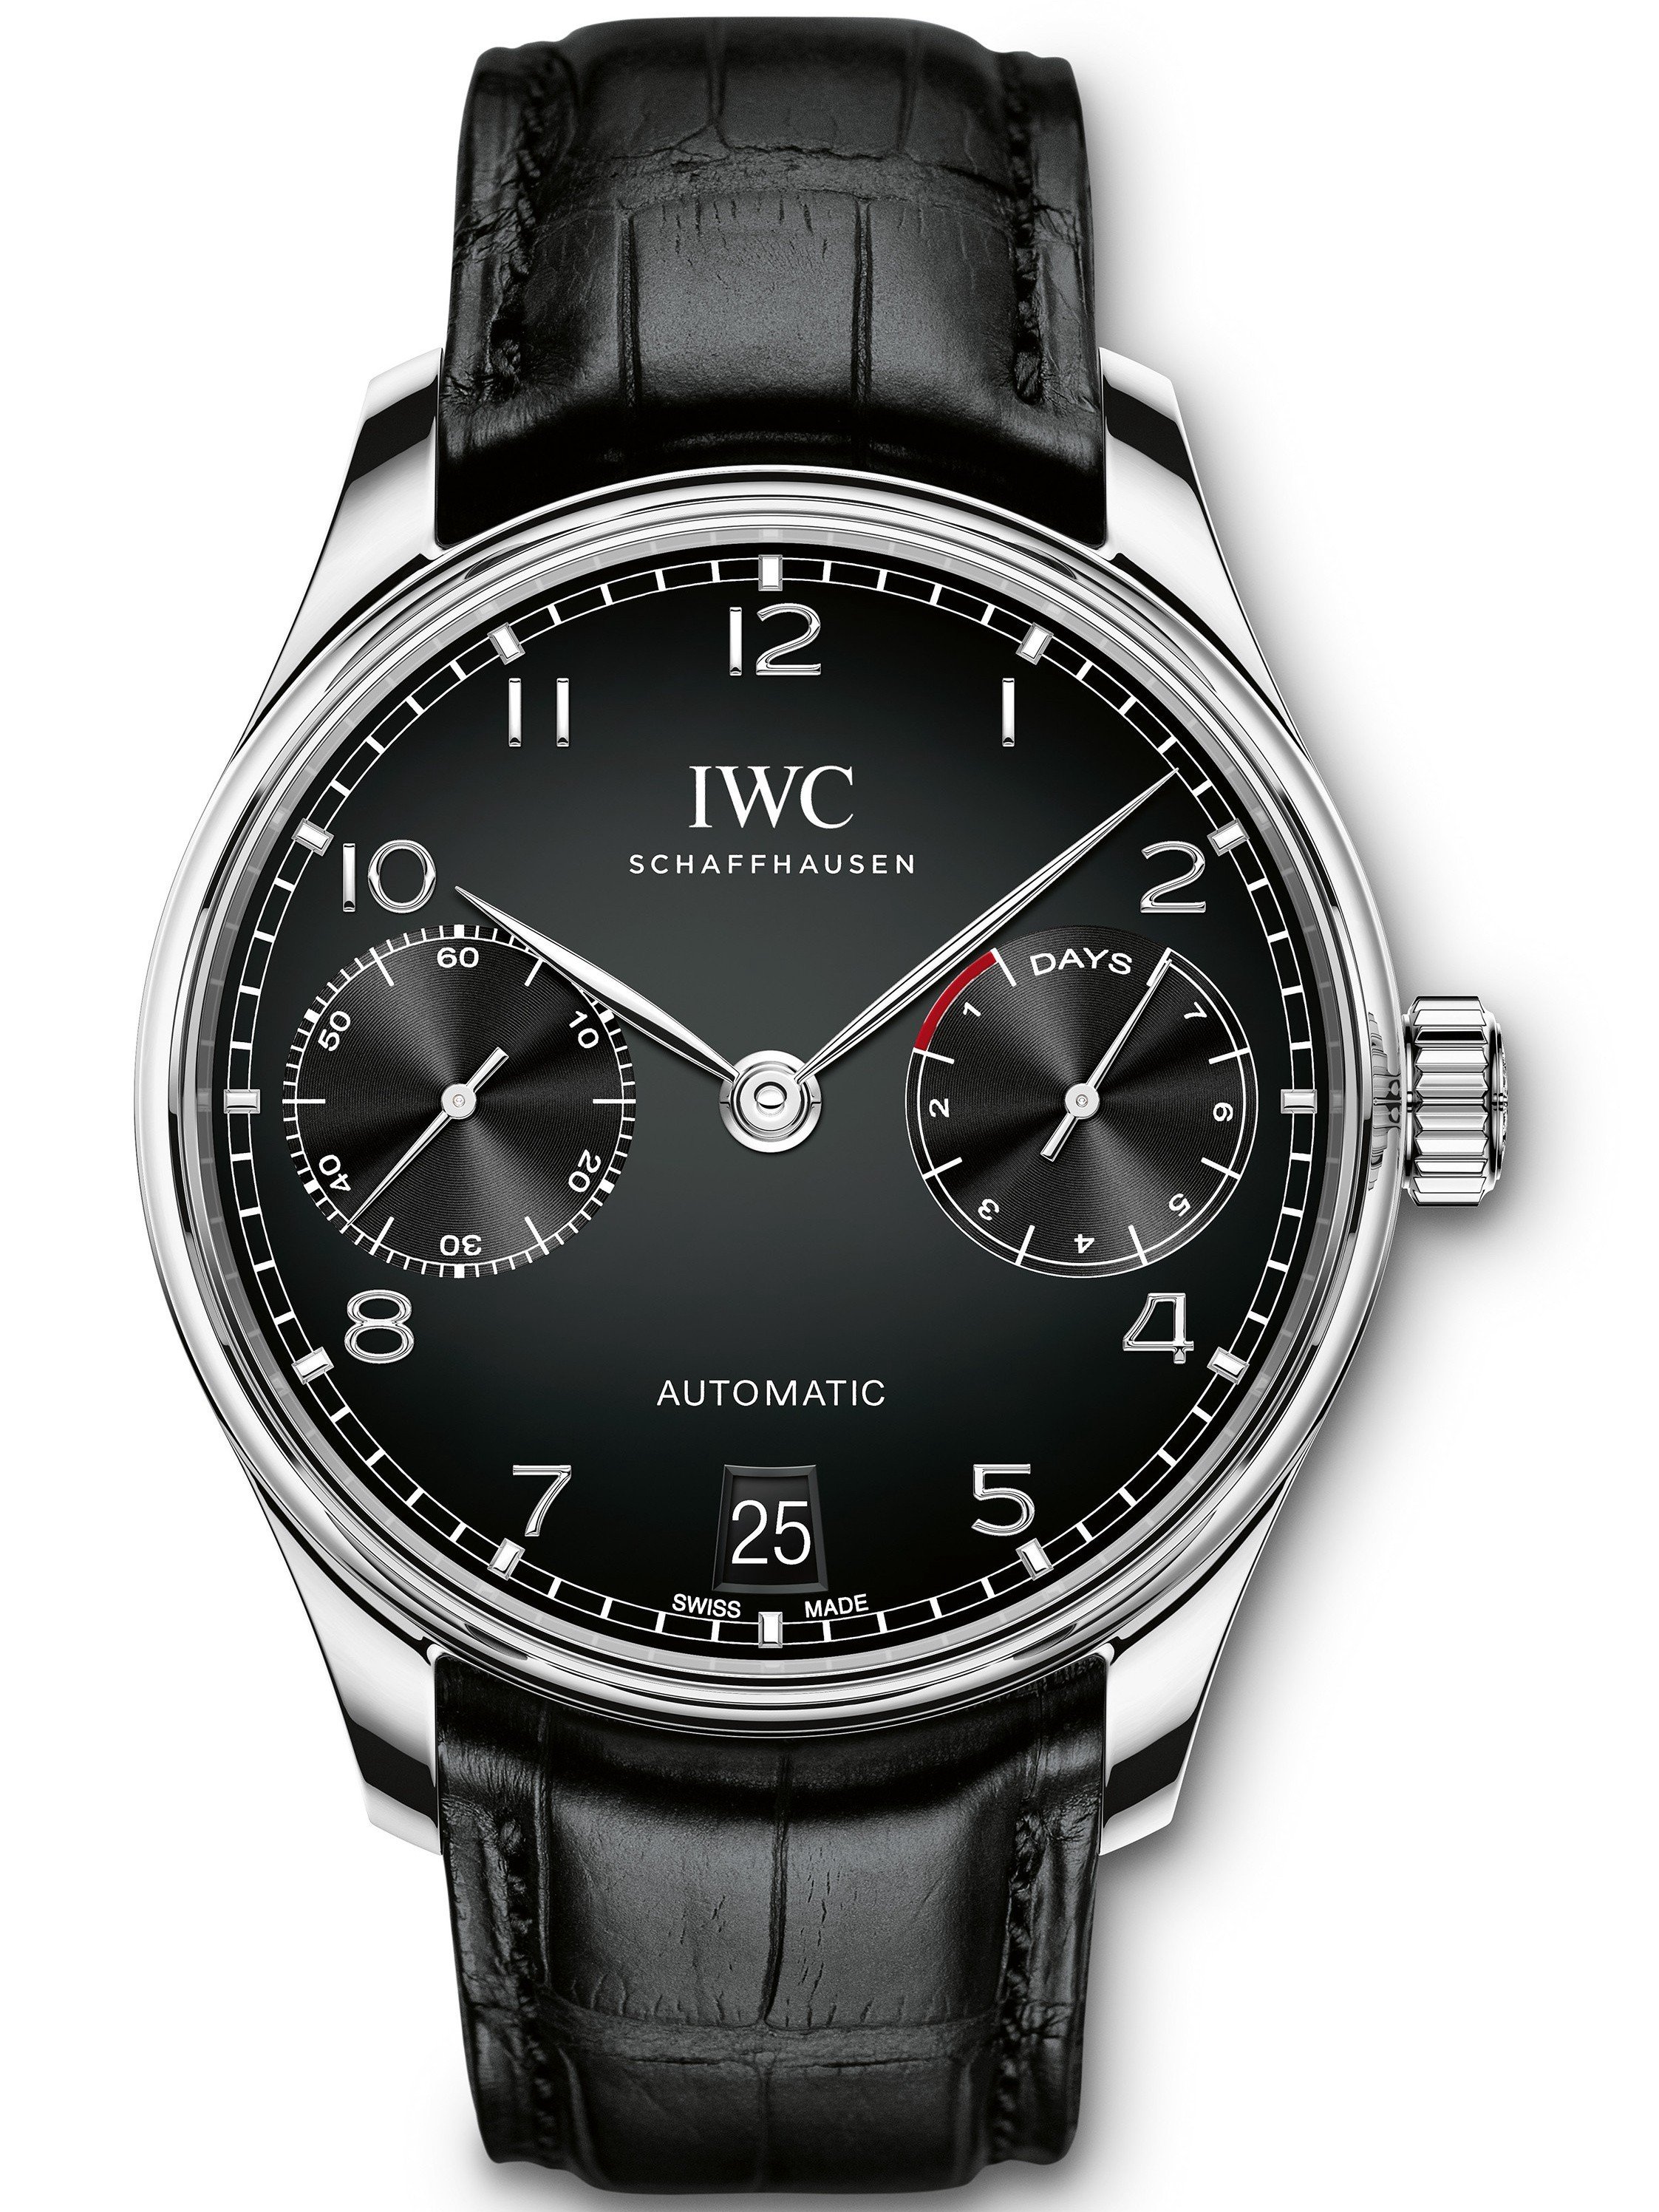 AAA Replica IWC Portugieser Automatic 7 Day Power Reserve Mens Watch IW500703